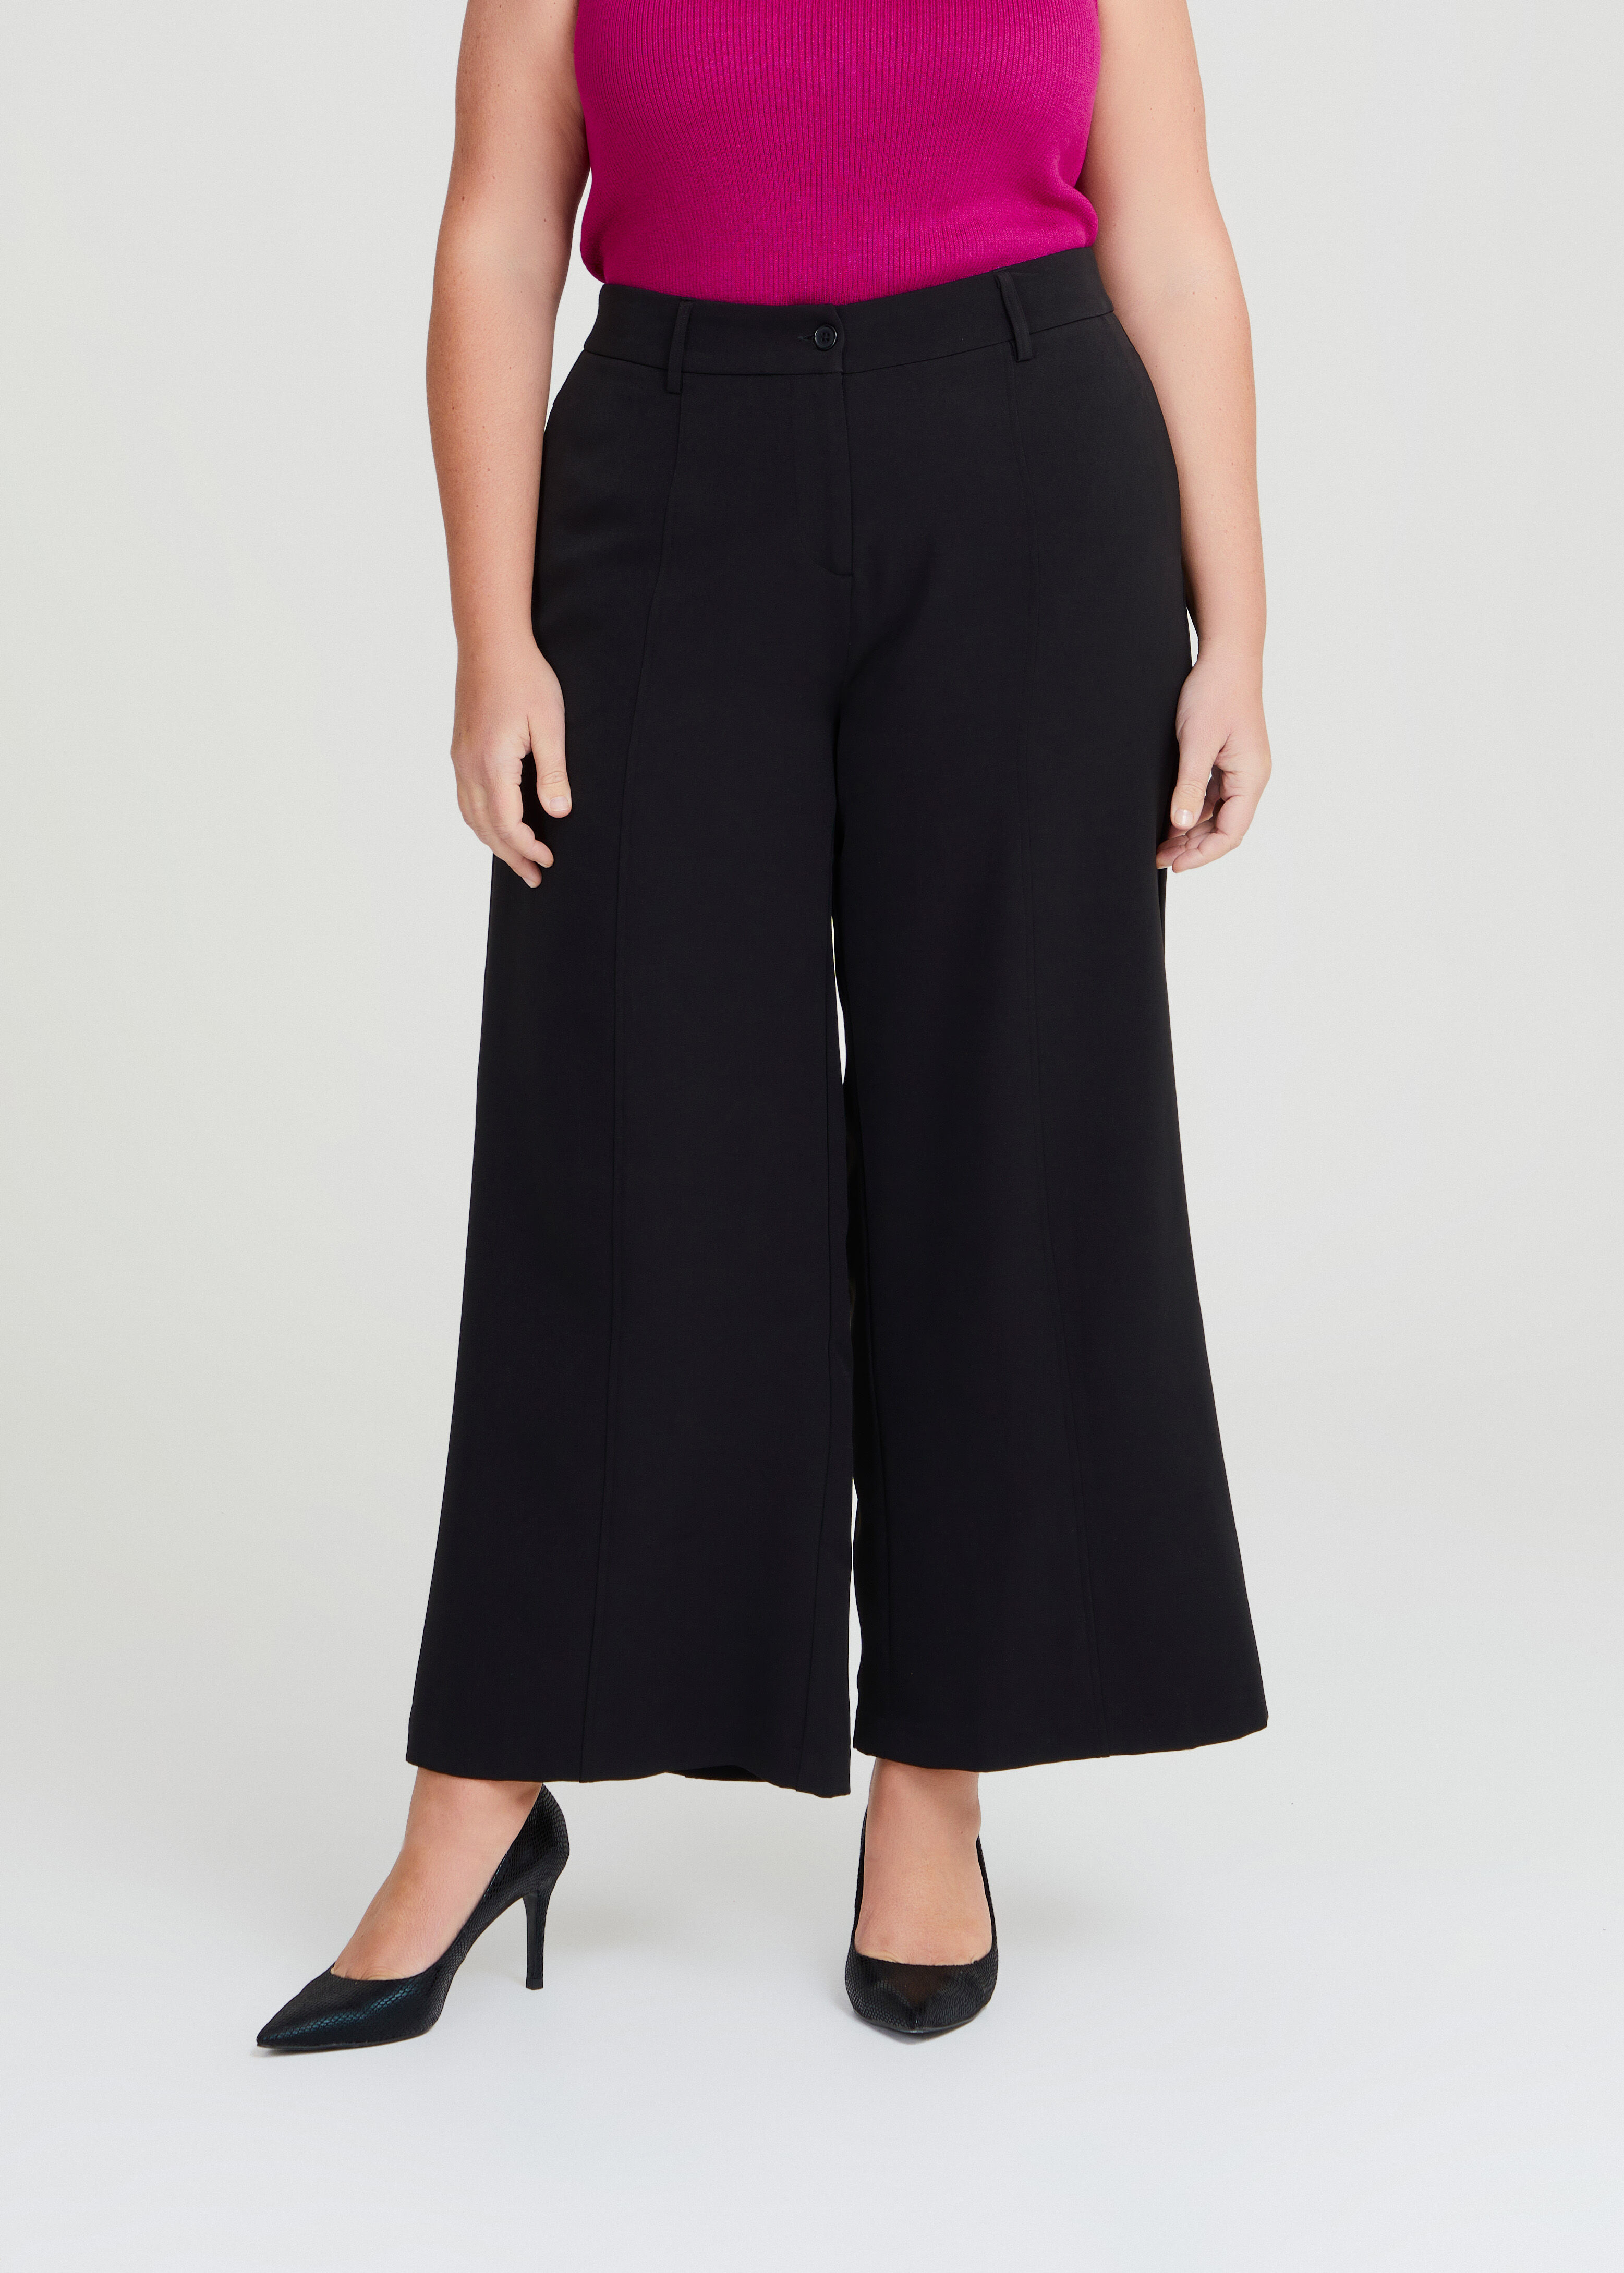 Shop Plus Size Pin Tuck Trousers in Black | Sizes 12-30 | Taking